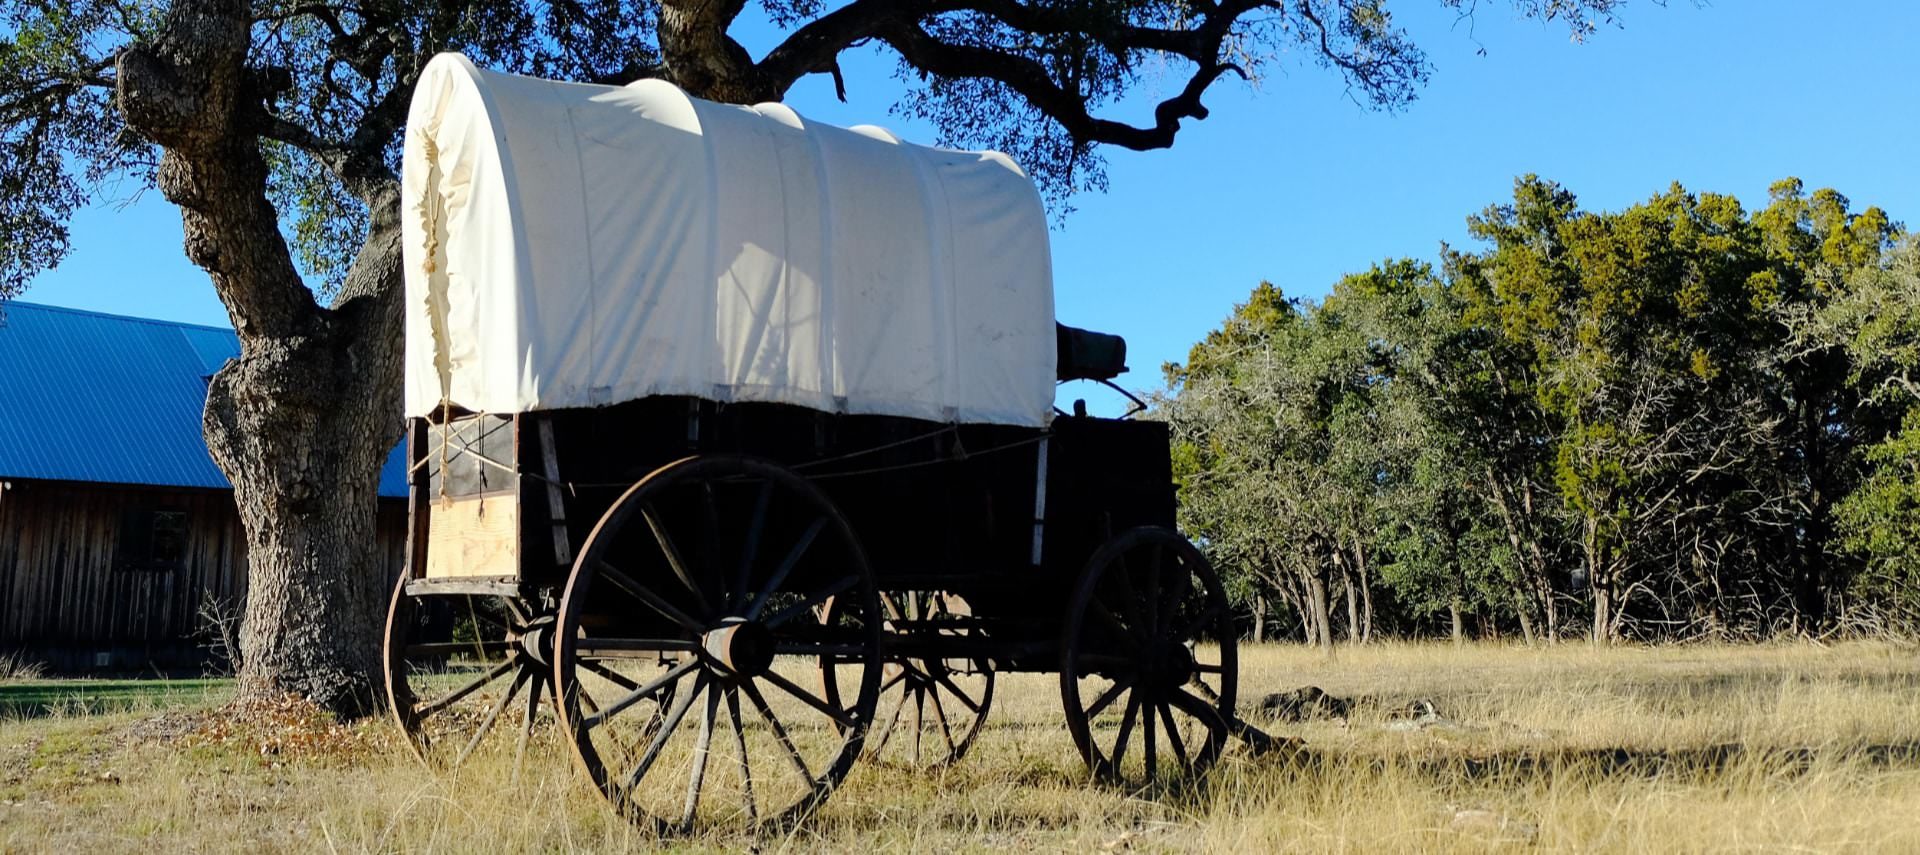 Old covered wagon sitting in a grassy area with large trees and a barn in the background